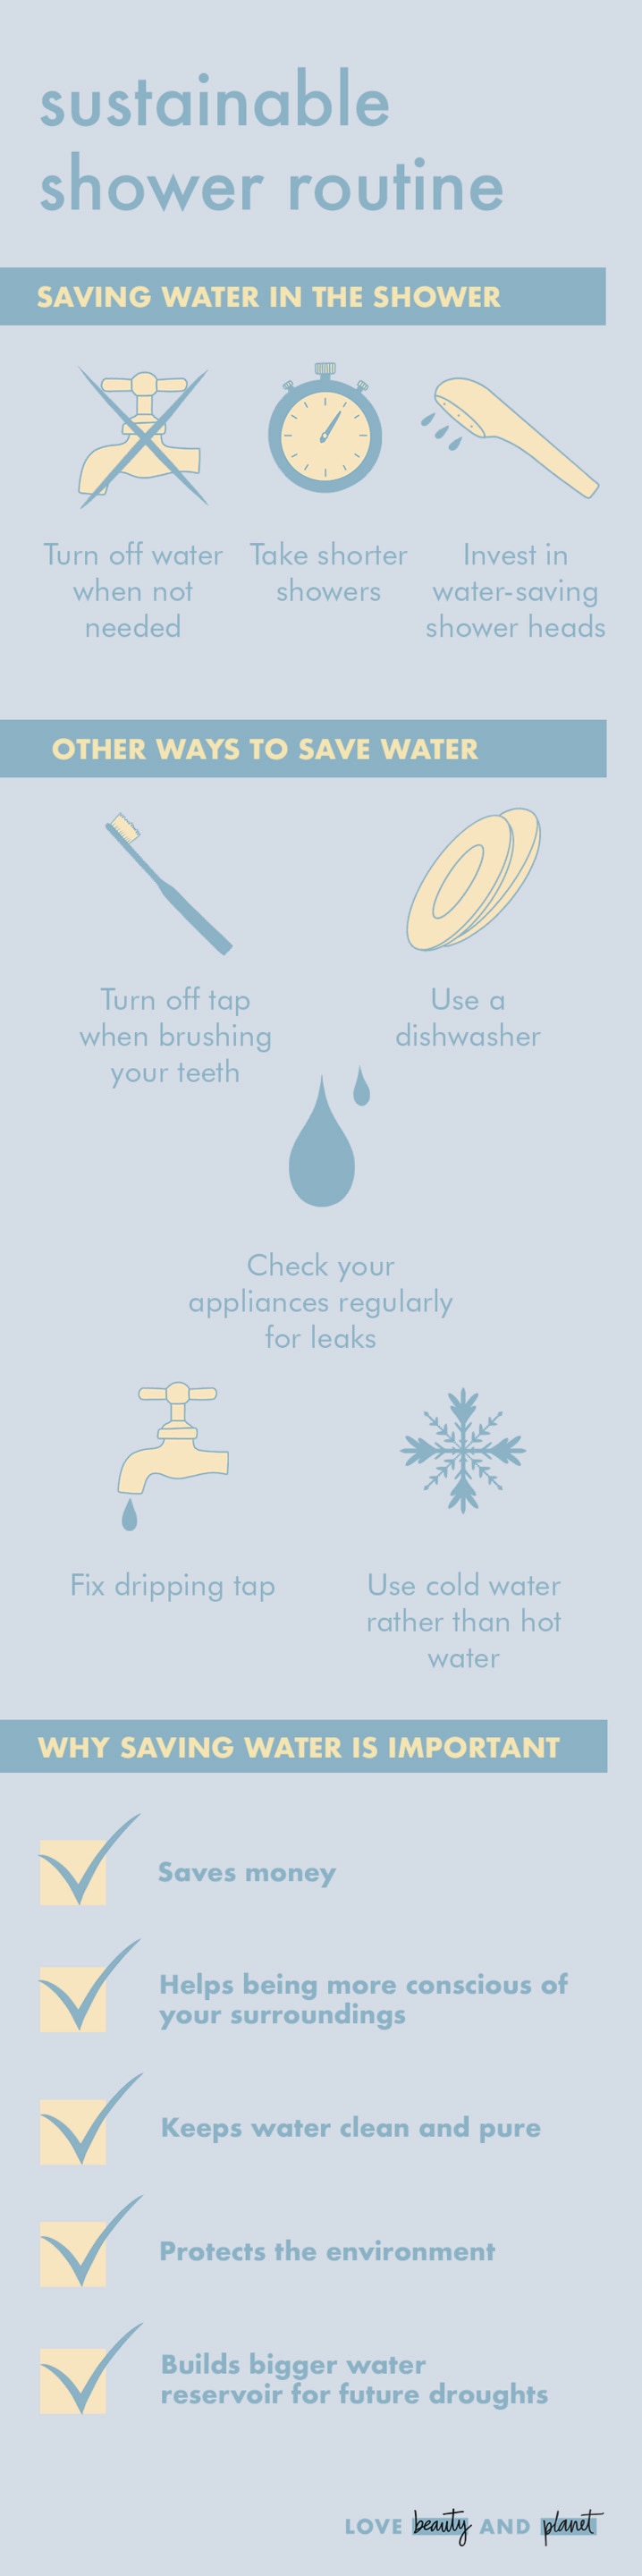 shower routine to save water infographic